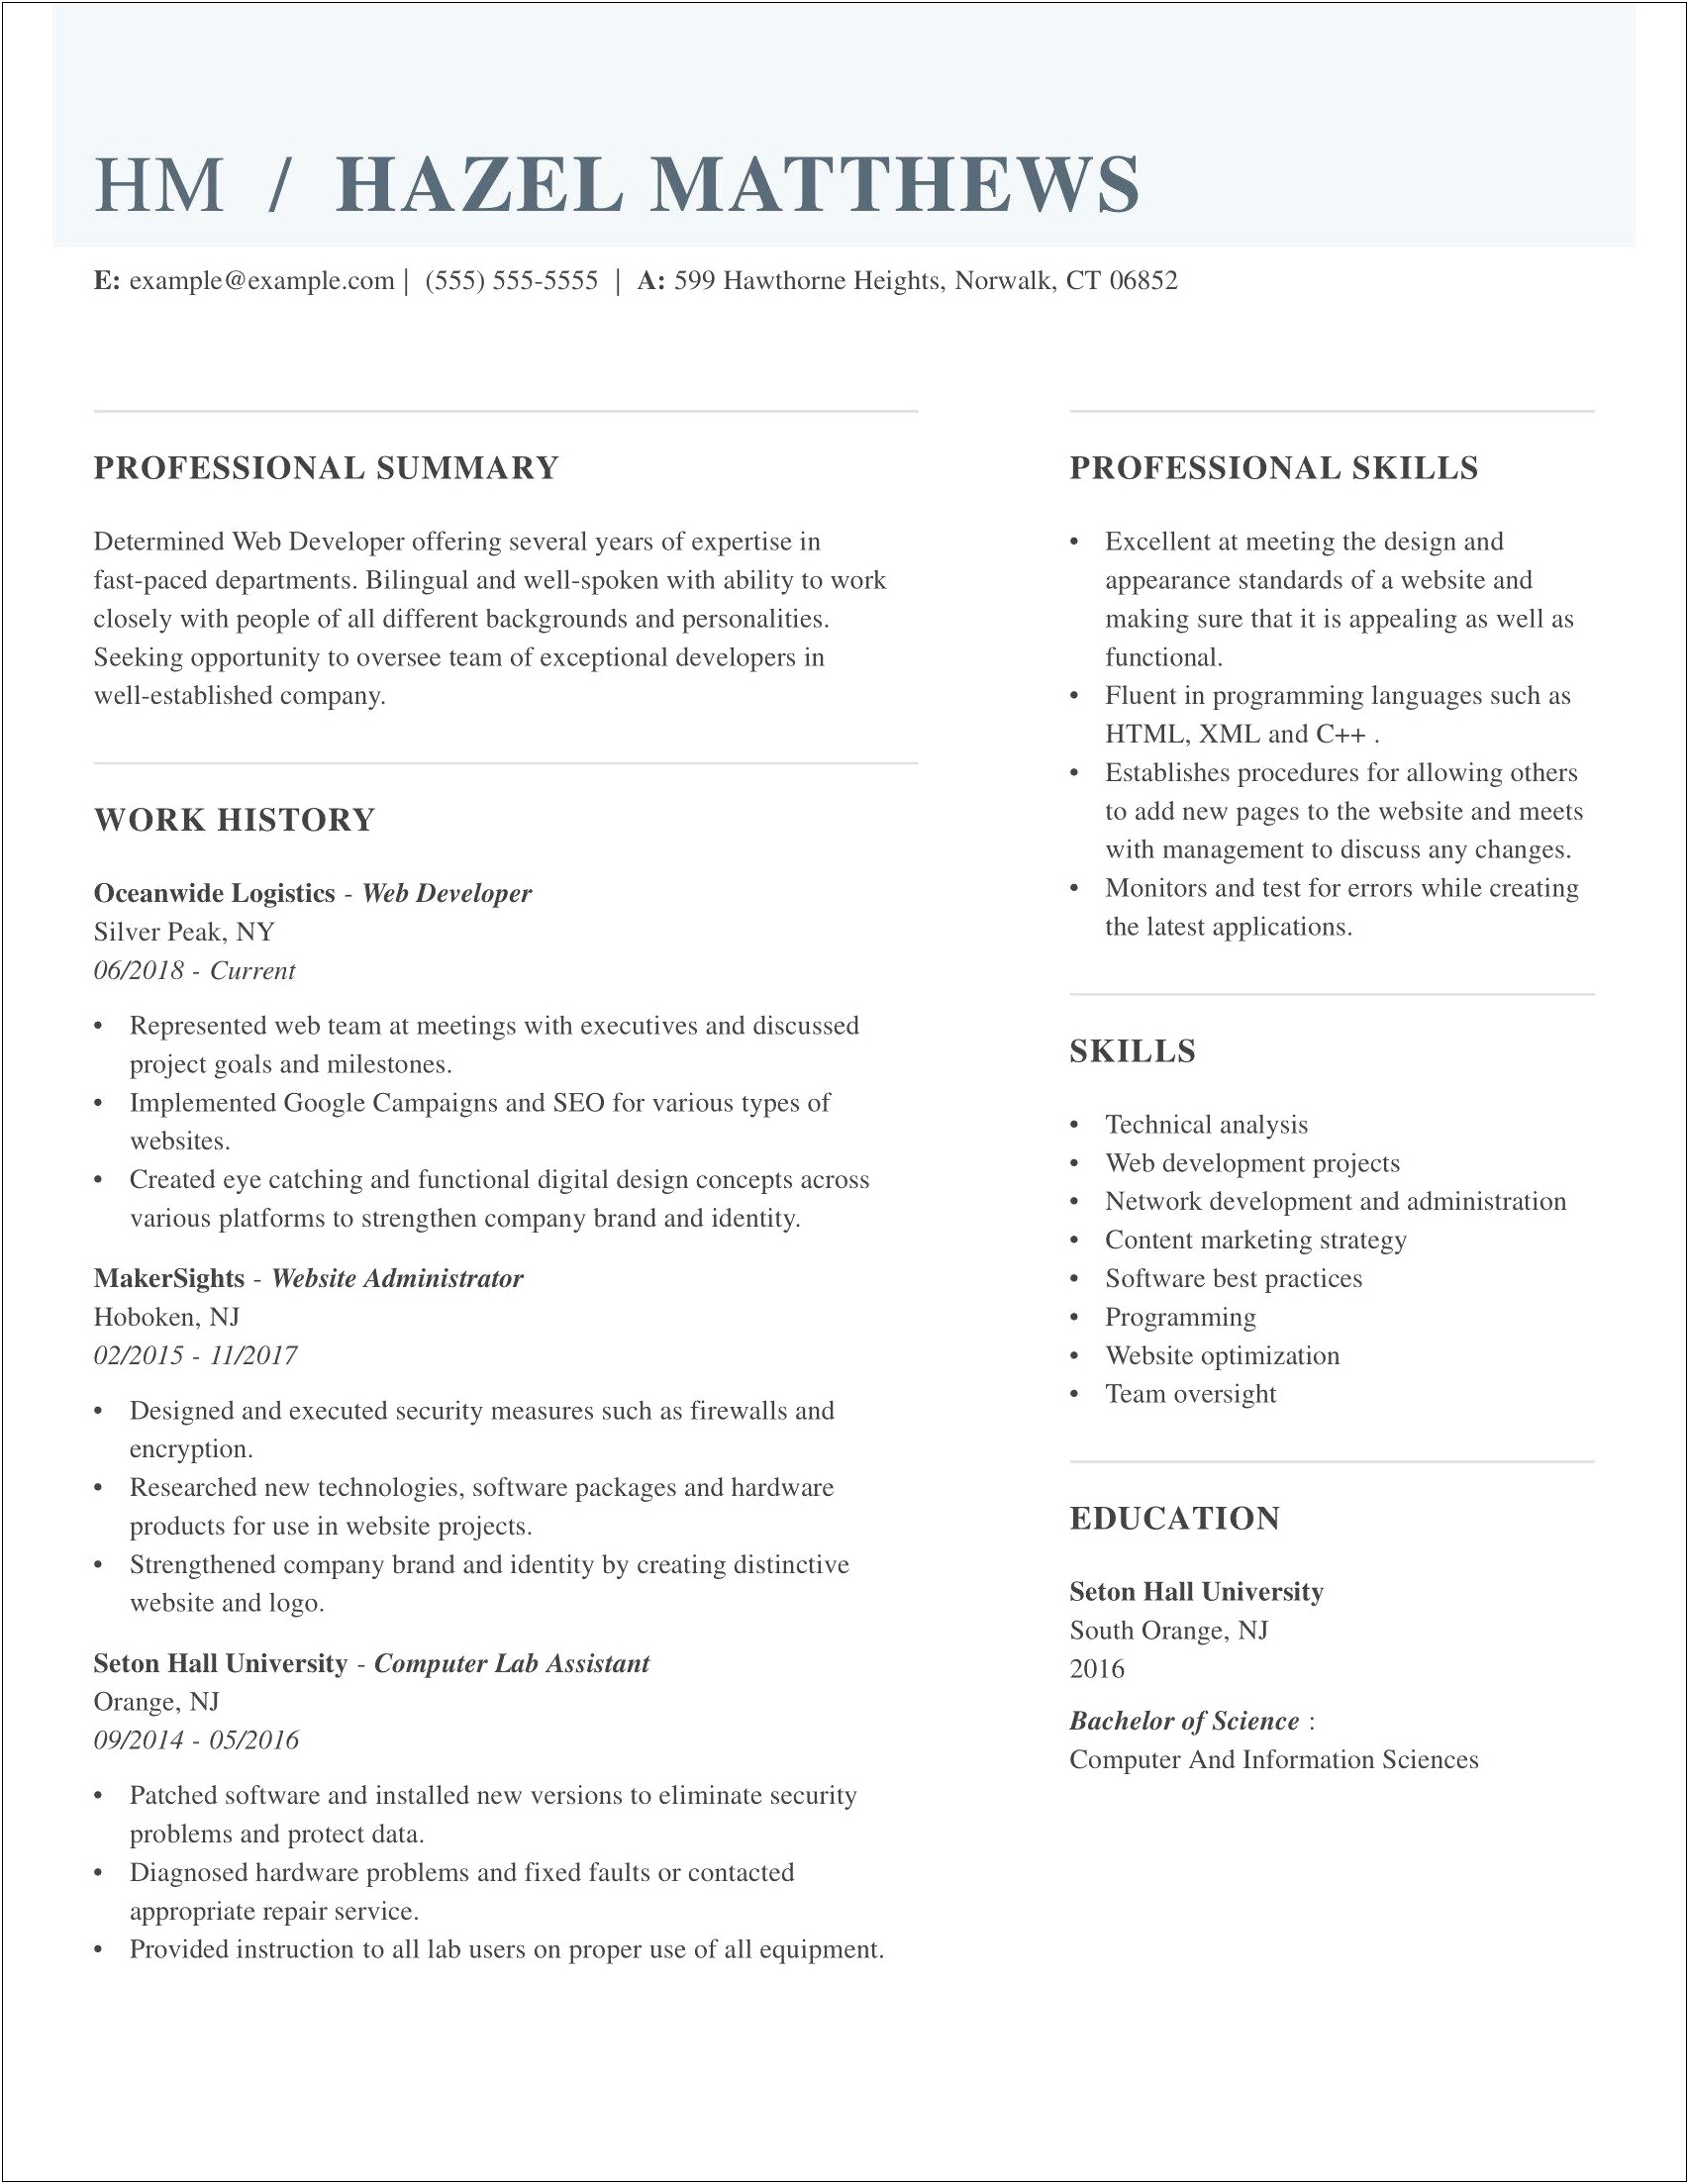 Lab Experience In Resumes For Law School